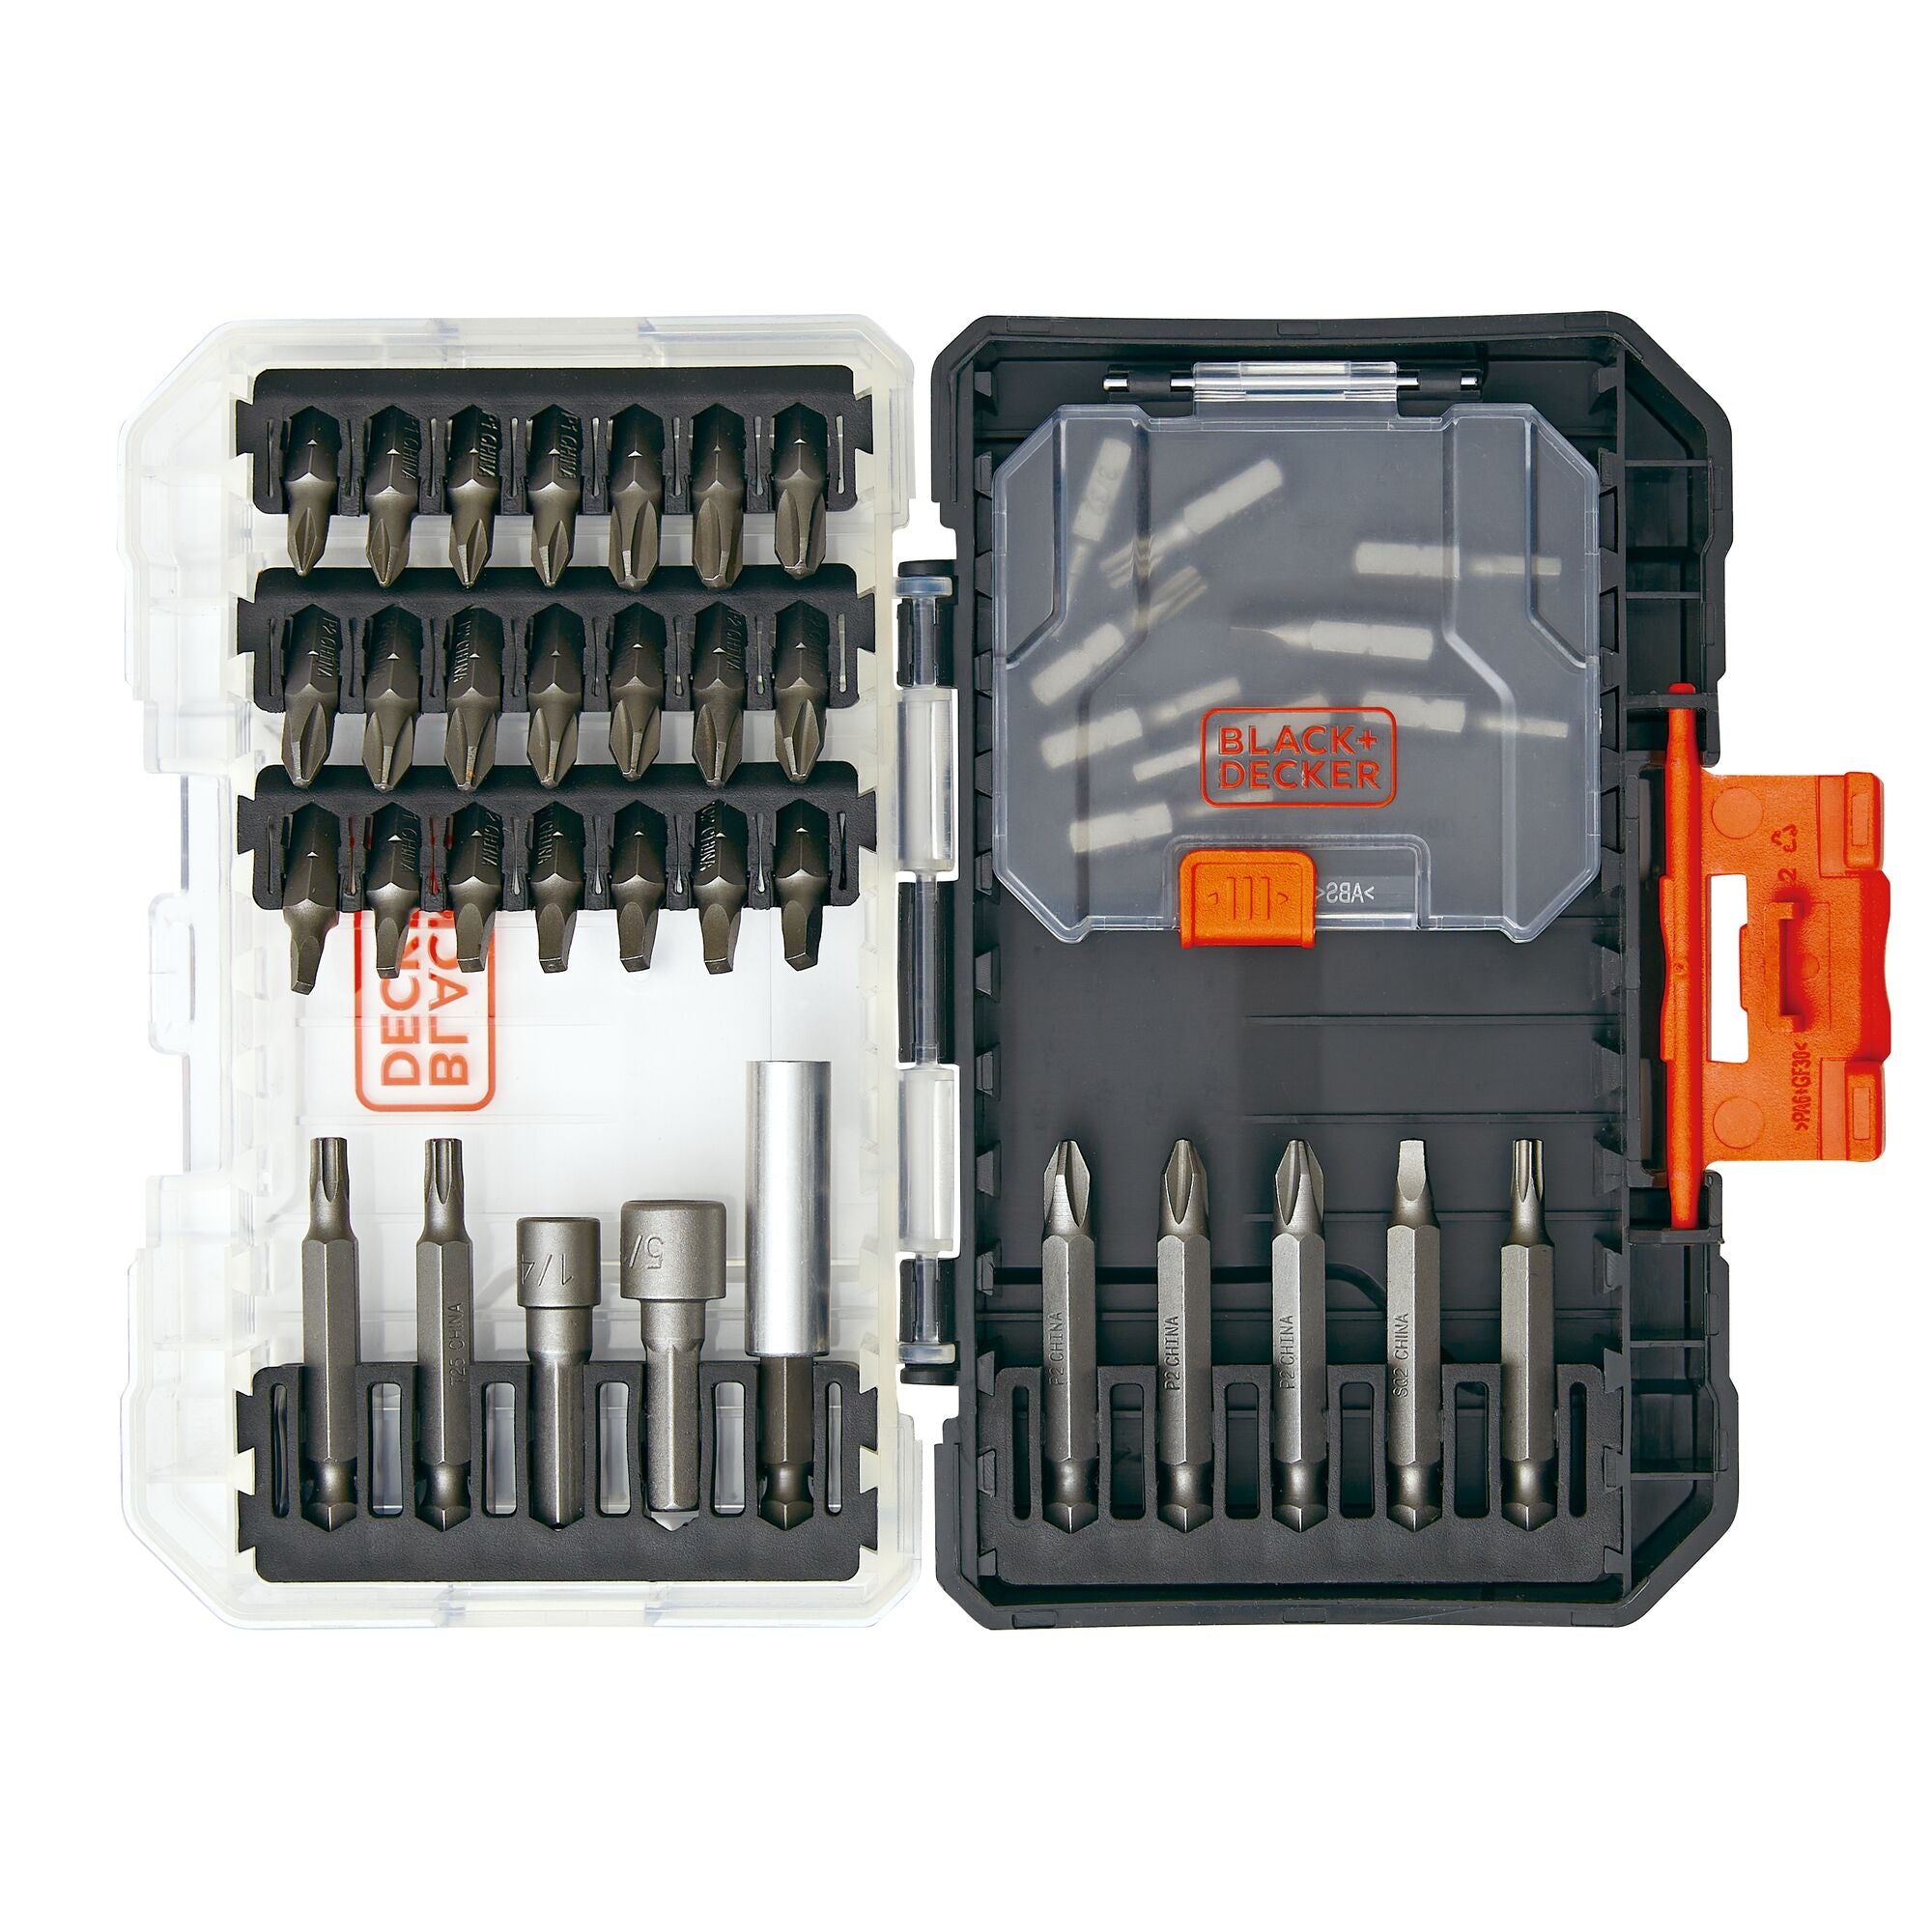 Ariel view of BLACK+DECKER 40 piece screwdriver set with pieces and closed compartments